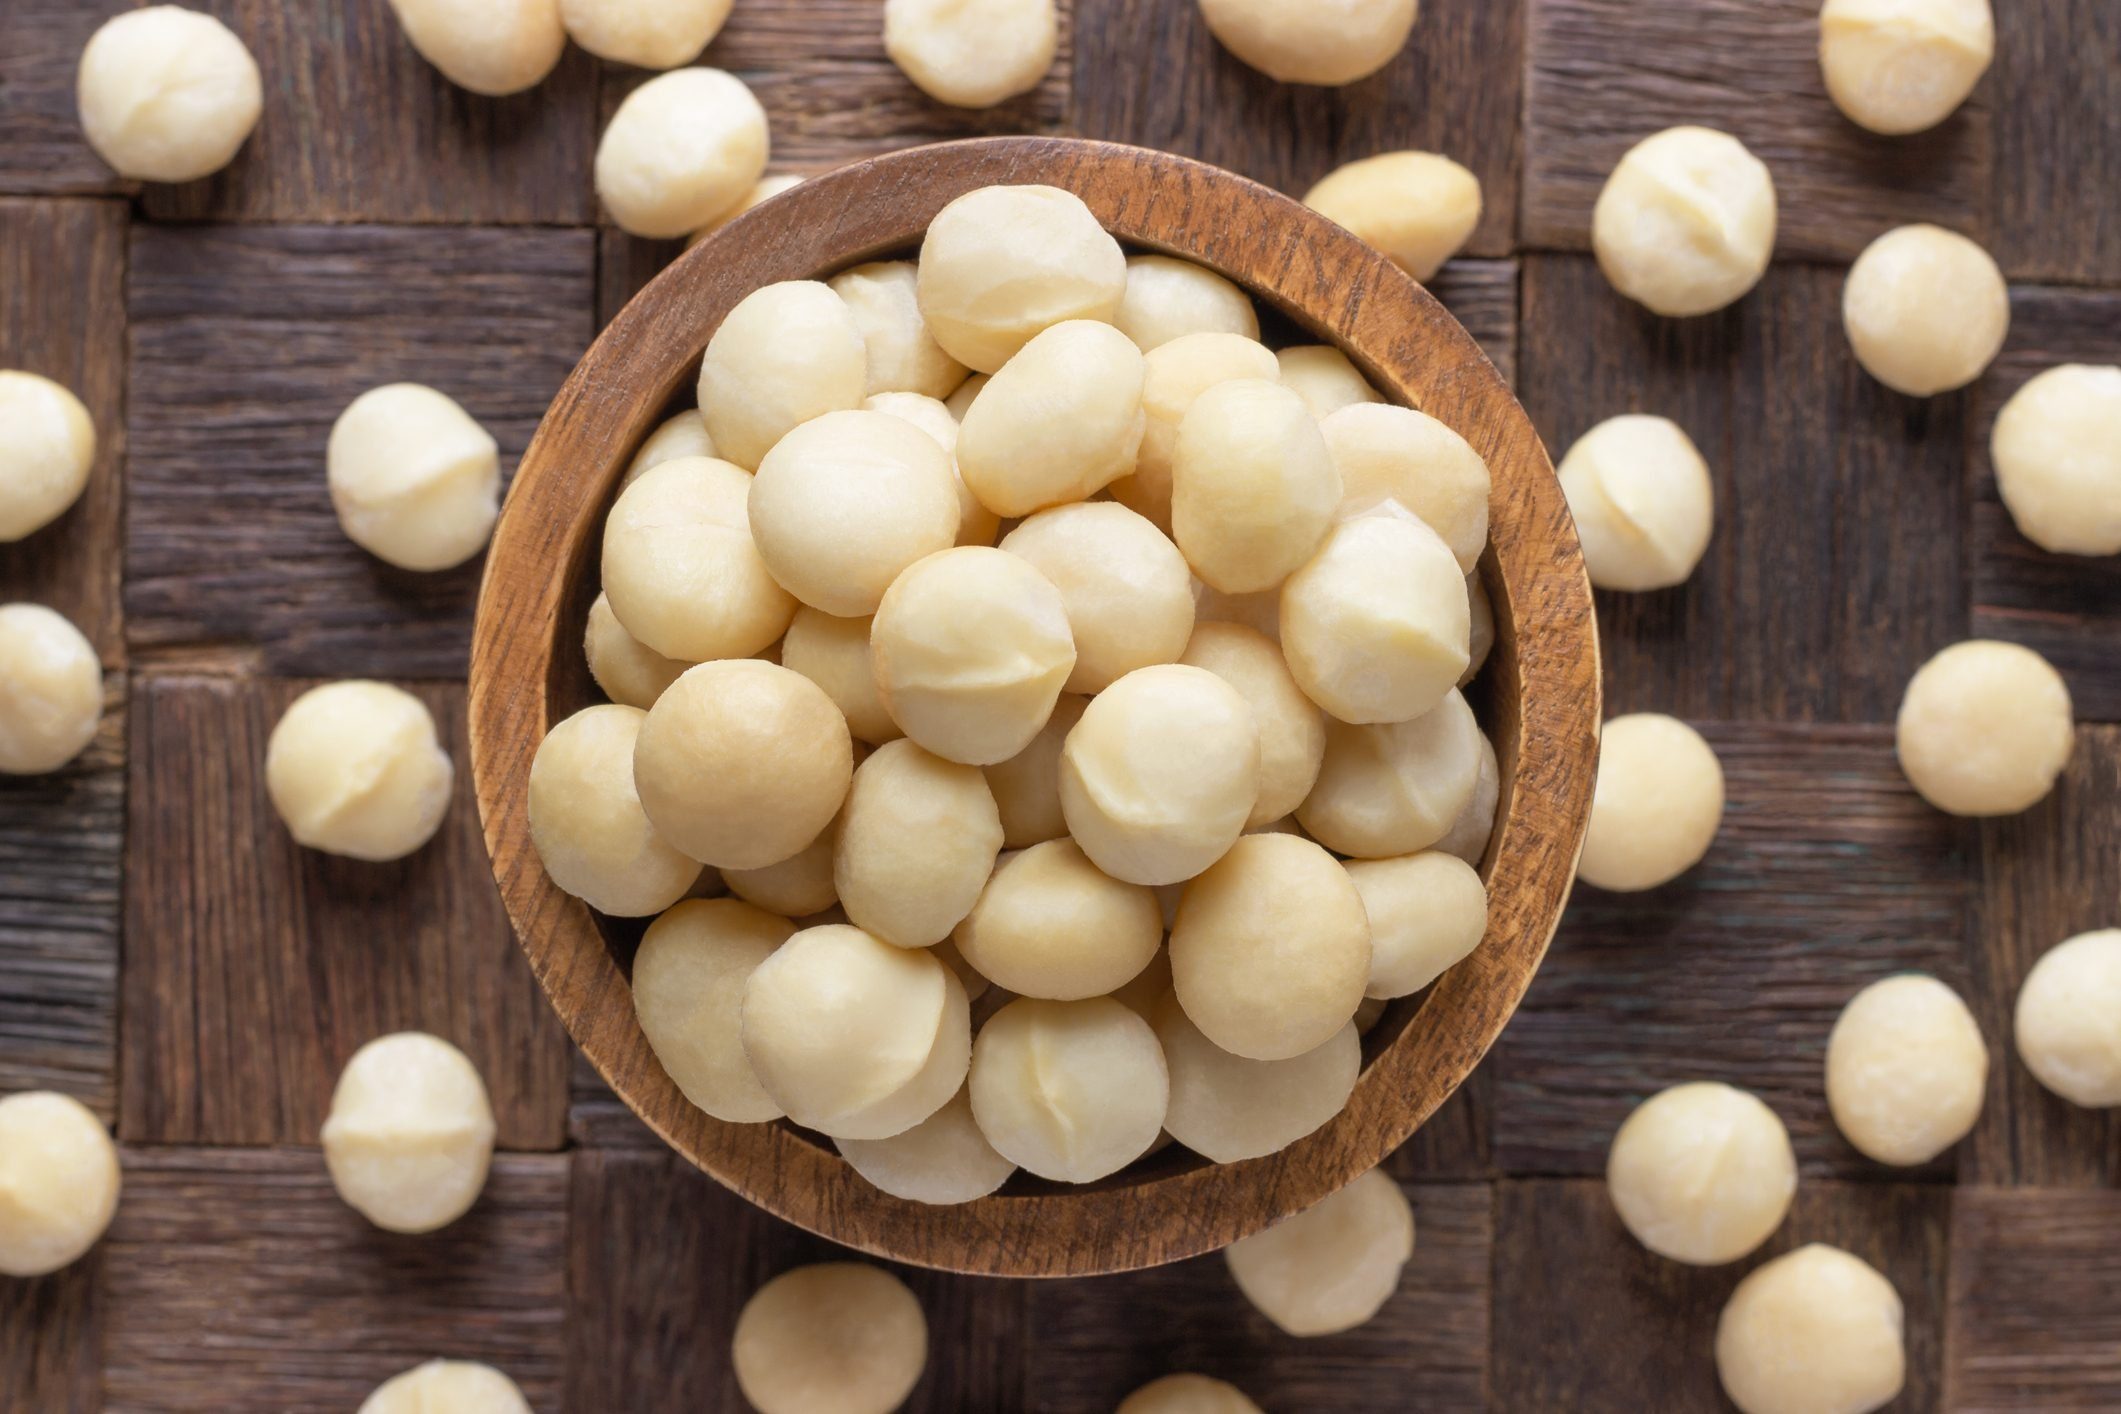 Are Macadamia Nuts Good for You? Their Nutrition Benefits | Best Health